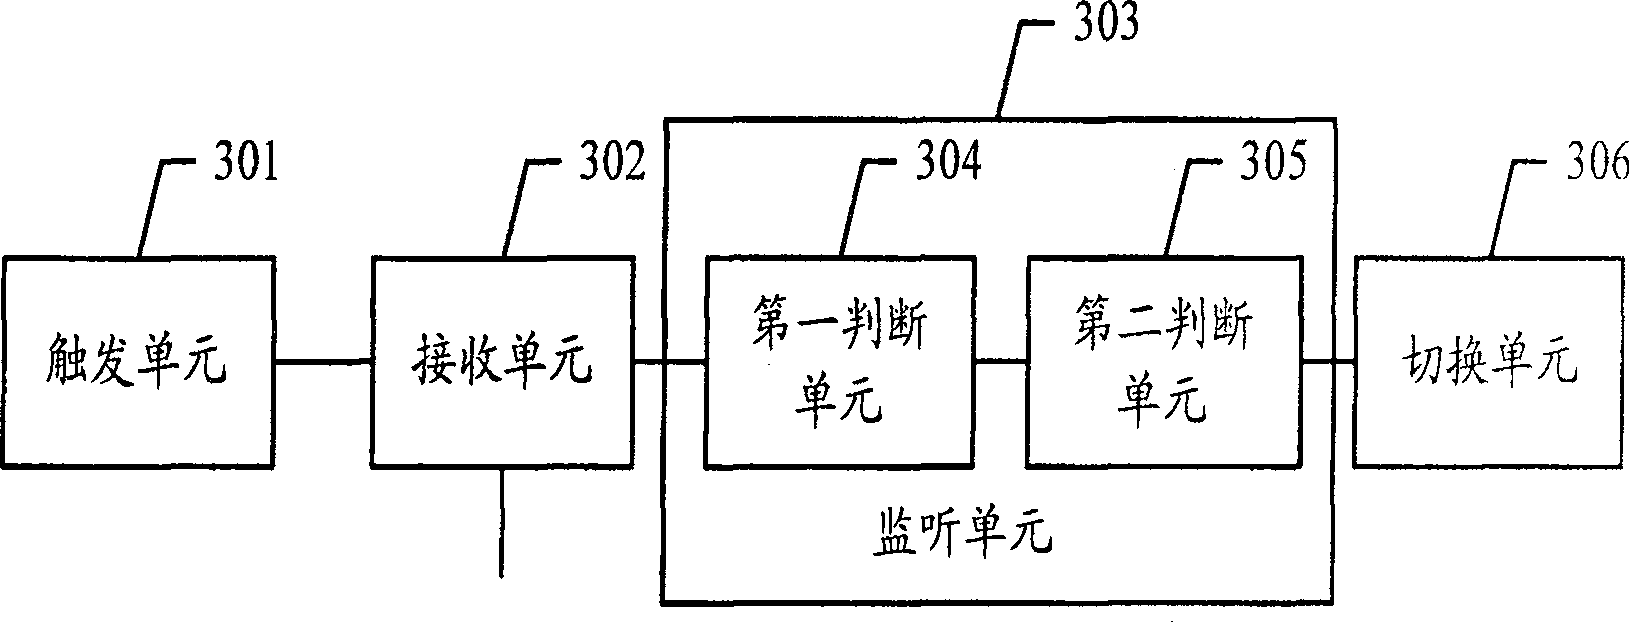 Failure monitoring method and device for virtual rented line